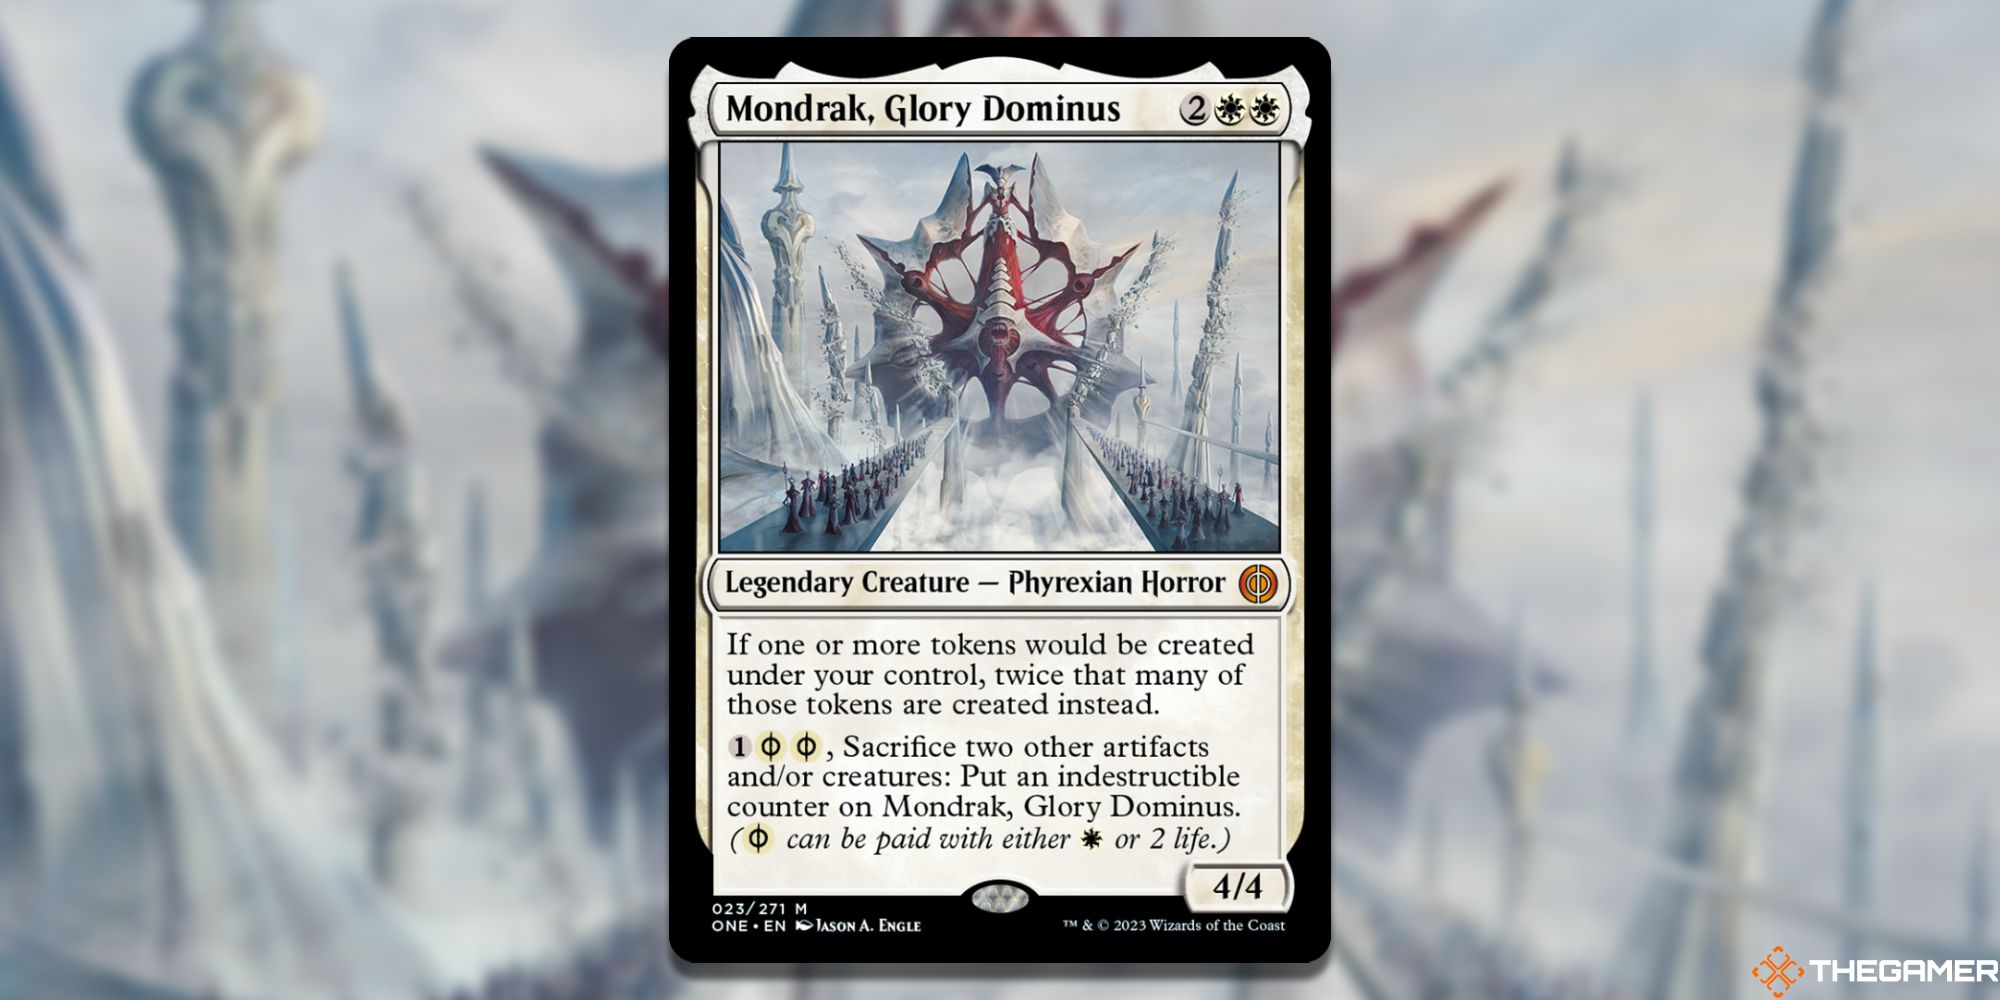 The card Mondrak, Glory Dominus from Magic: The Gathering.